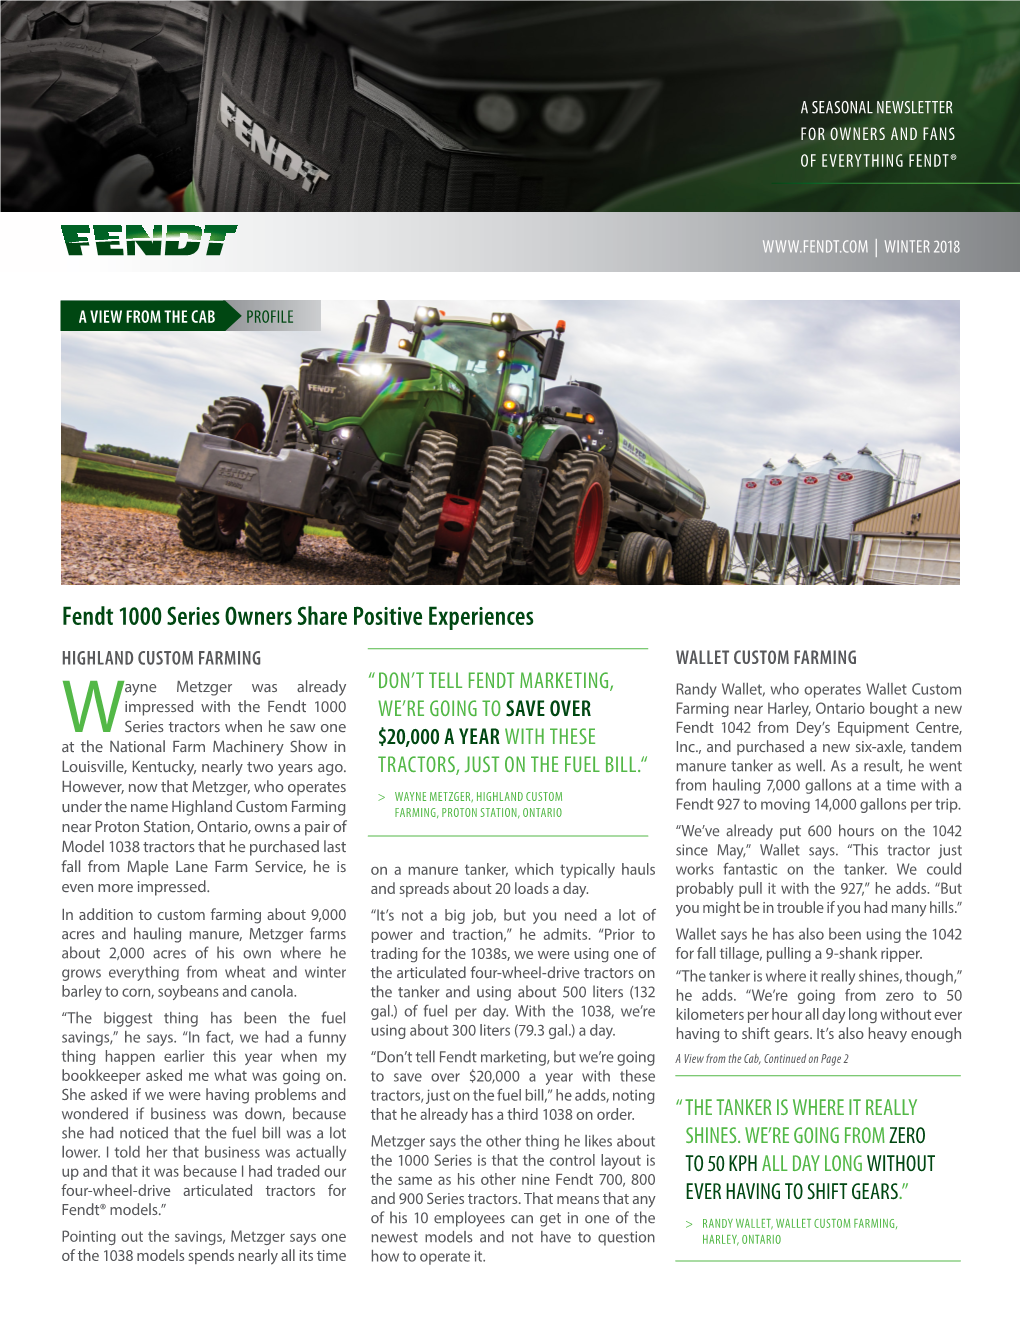 Fendt 1000 Series Owners Share Positive Experiences